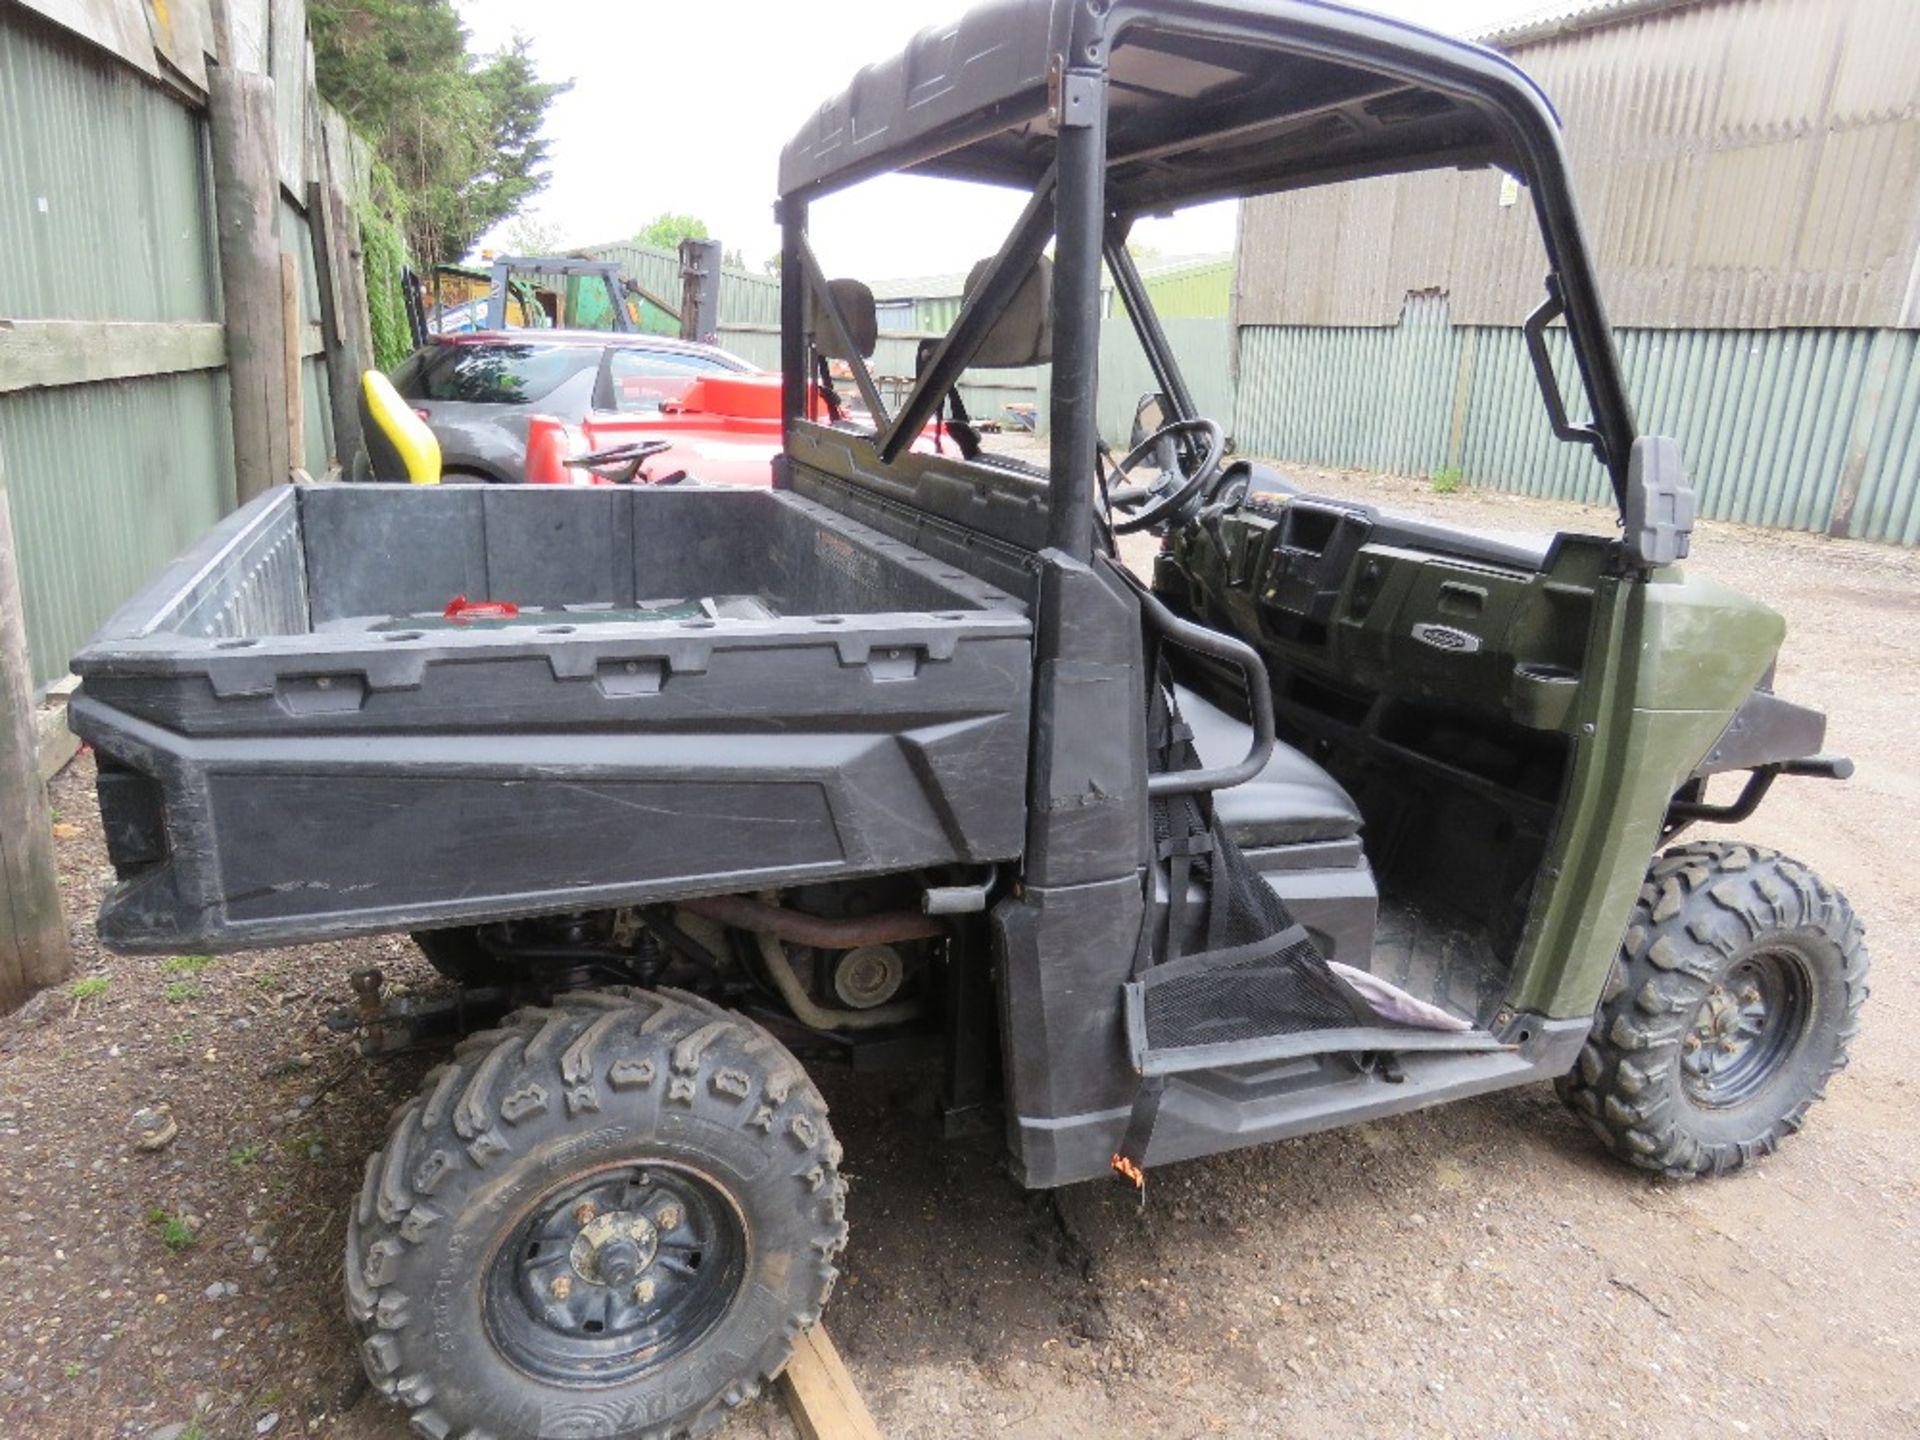 POLARIS RANGER DIESEL RTV REG:EU65 CLO. WHEN TESTED WAS SEEN TO DRIVE, STEER AND BRAKE......REQUIRES - Image 6 of 9